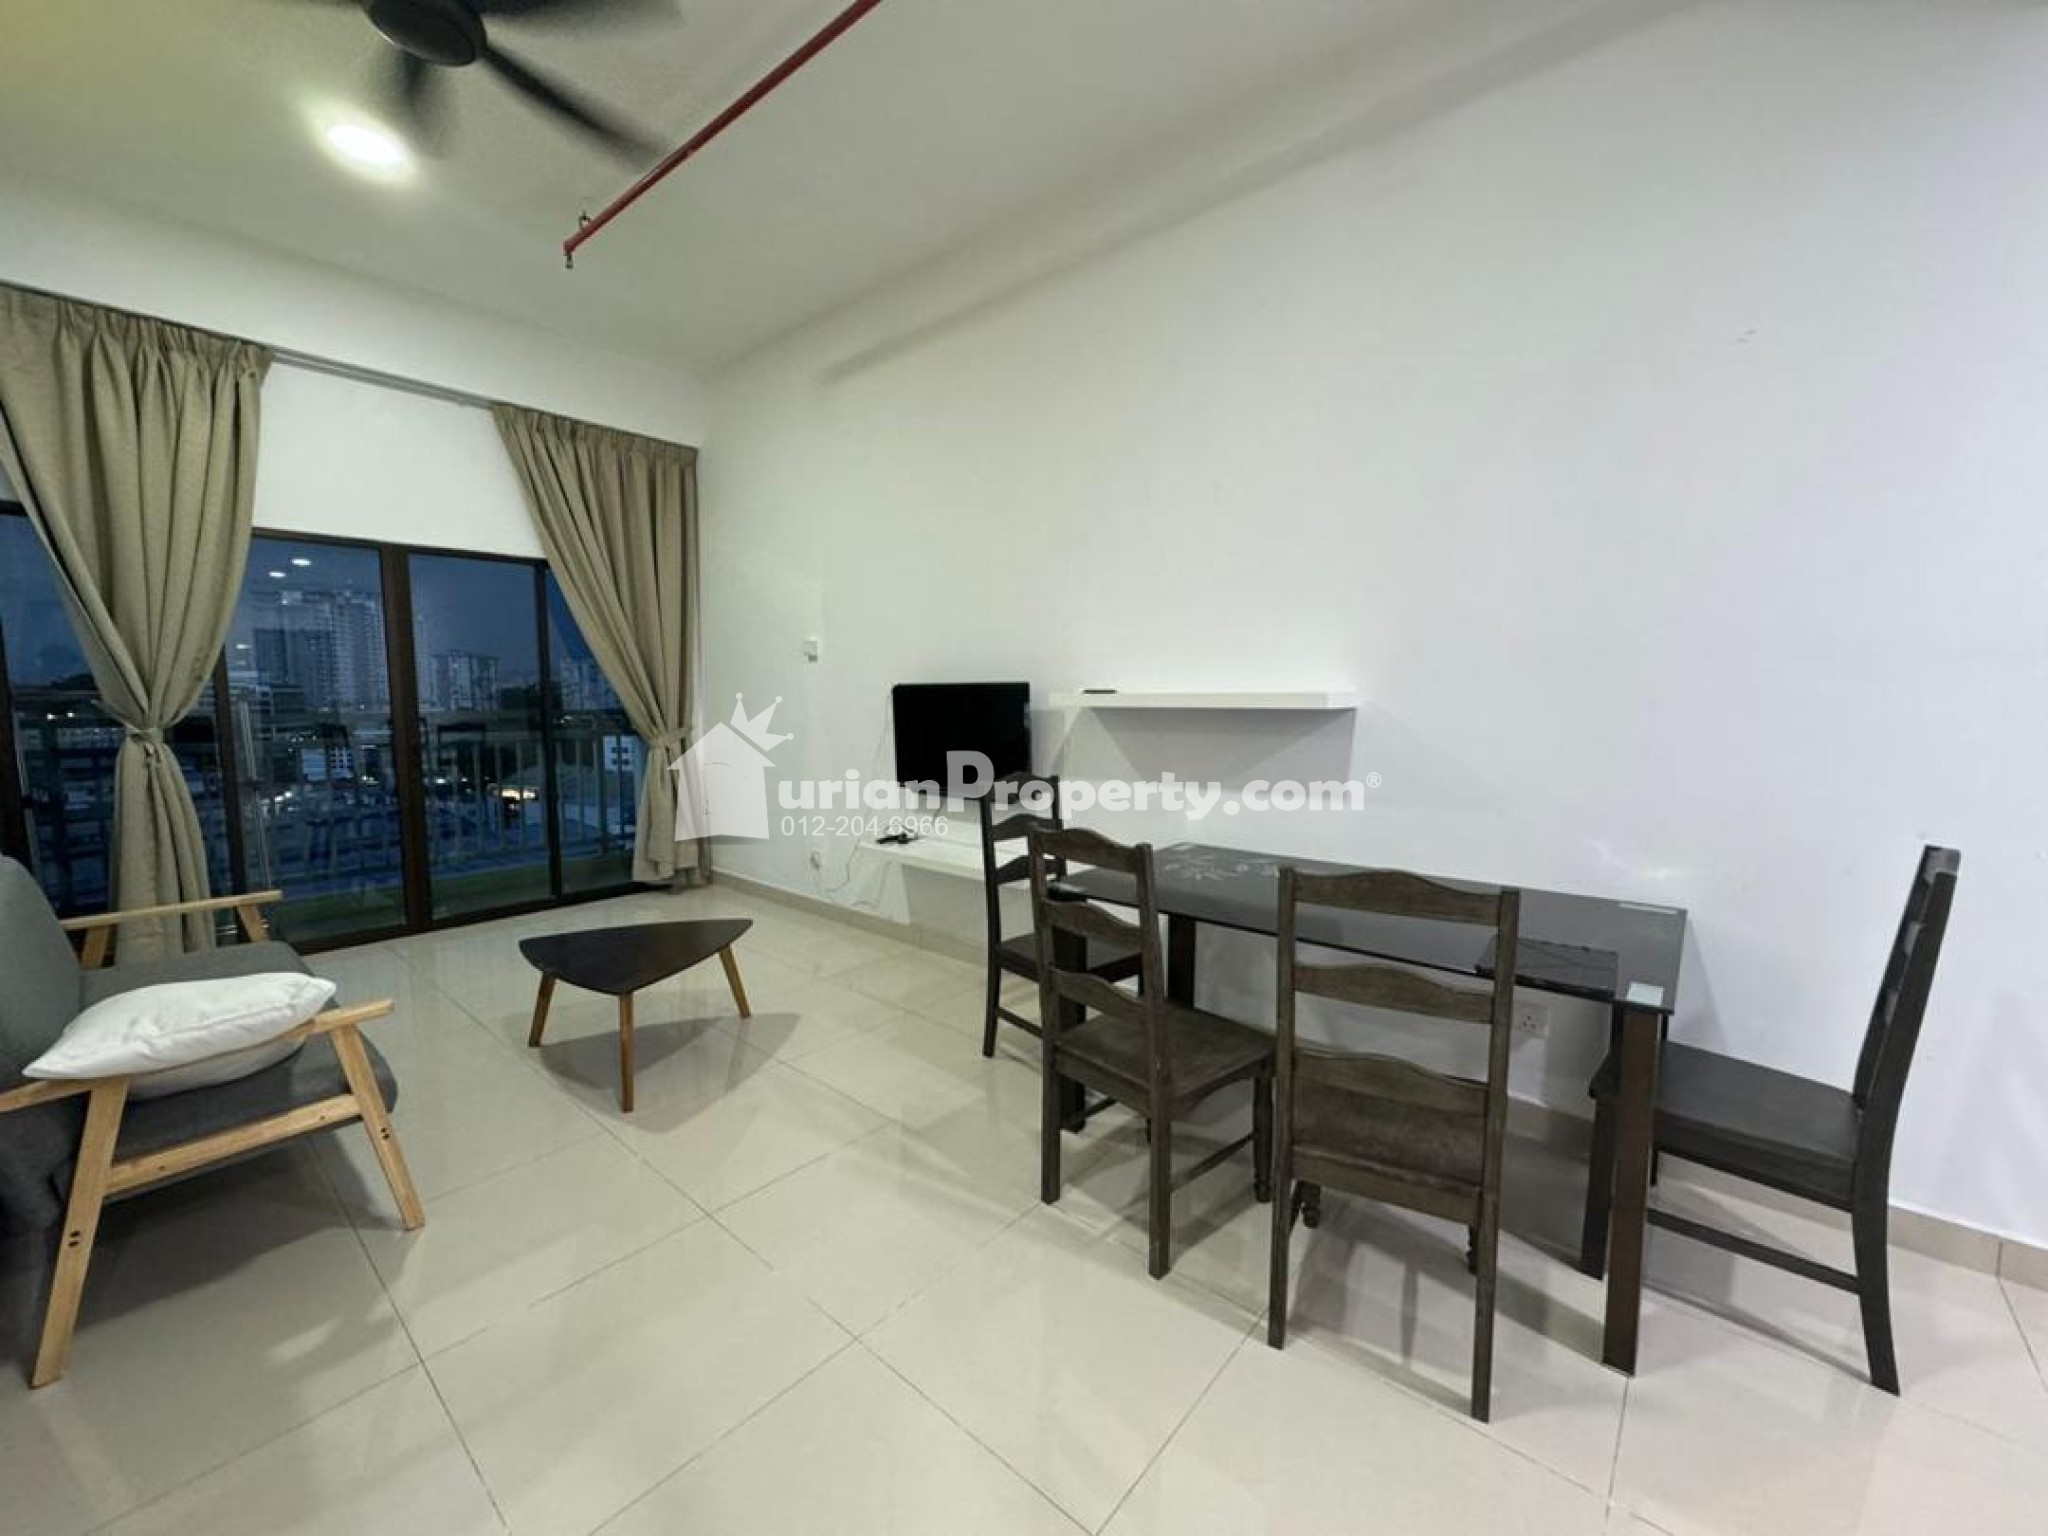 Condo For Rent at Park 51 Boulevard